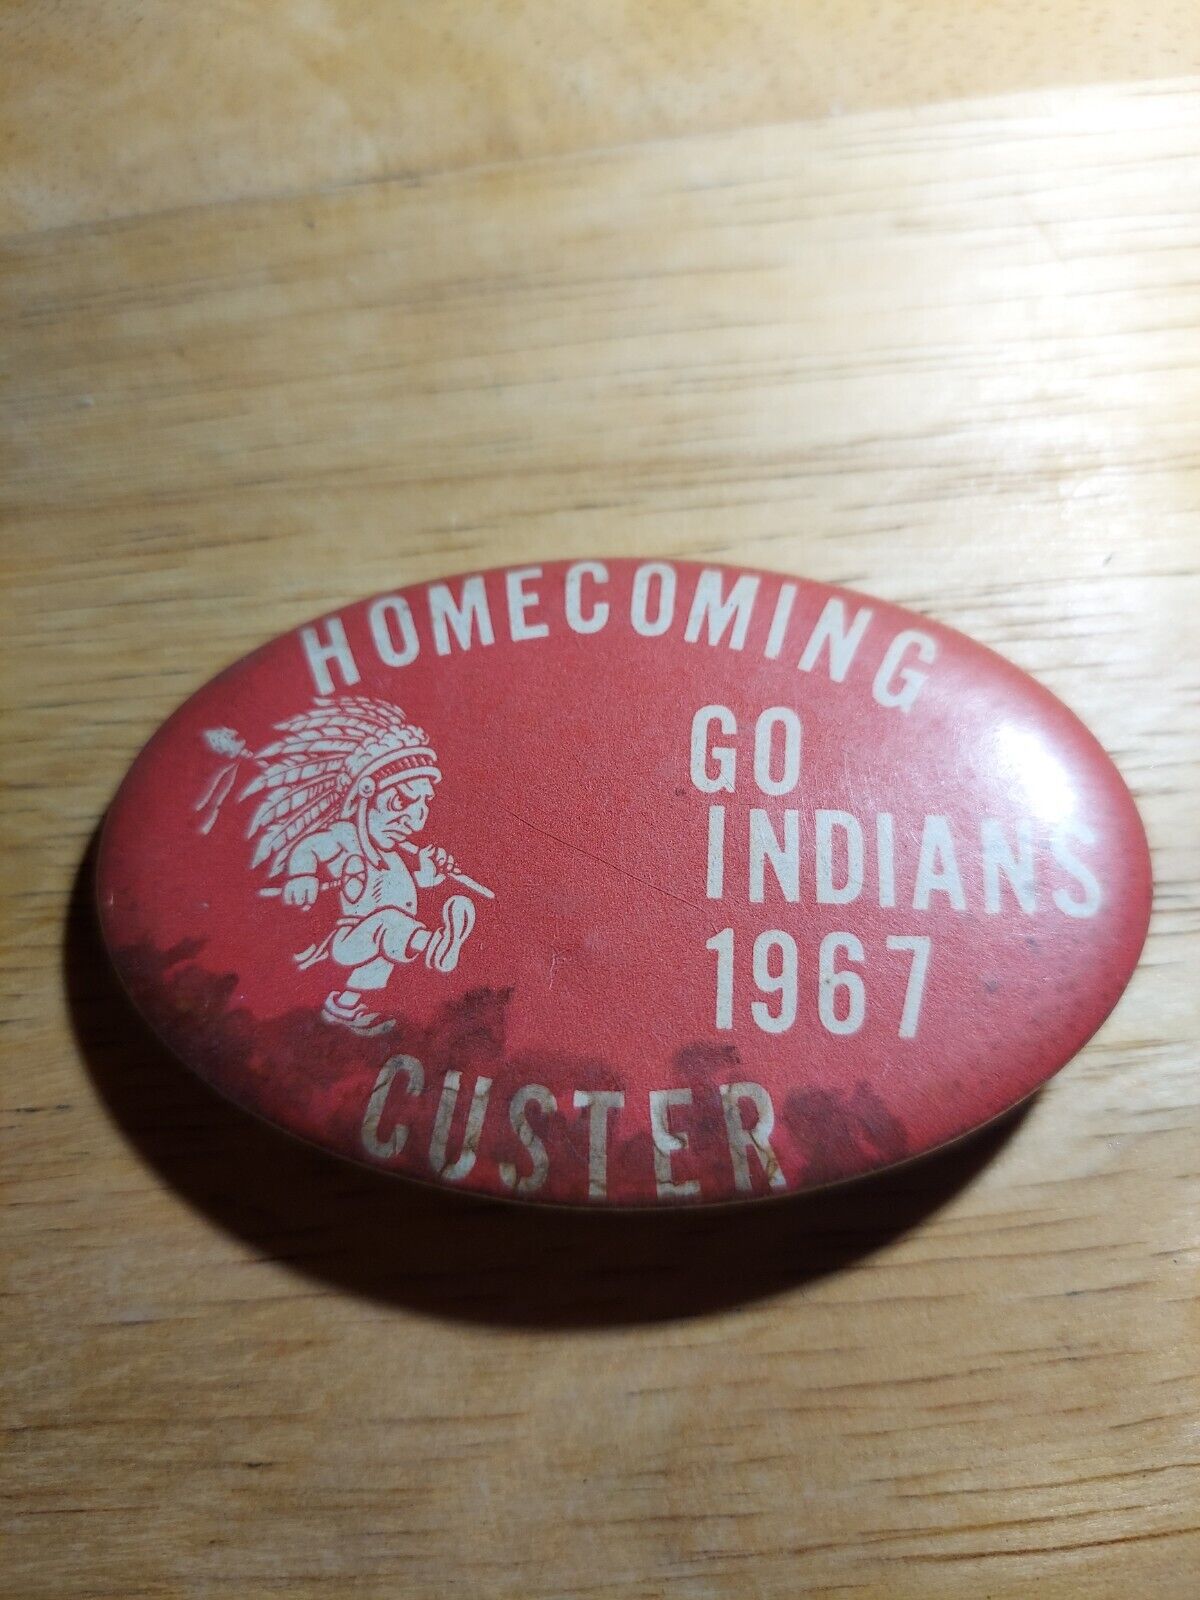 Vintage Go Indians 1967 Homecoming Custer Oval Pinback Button